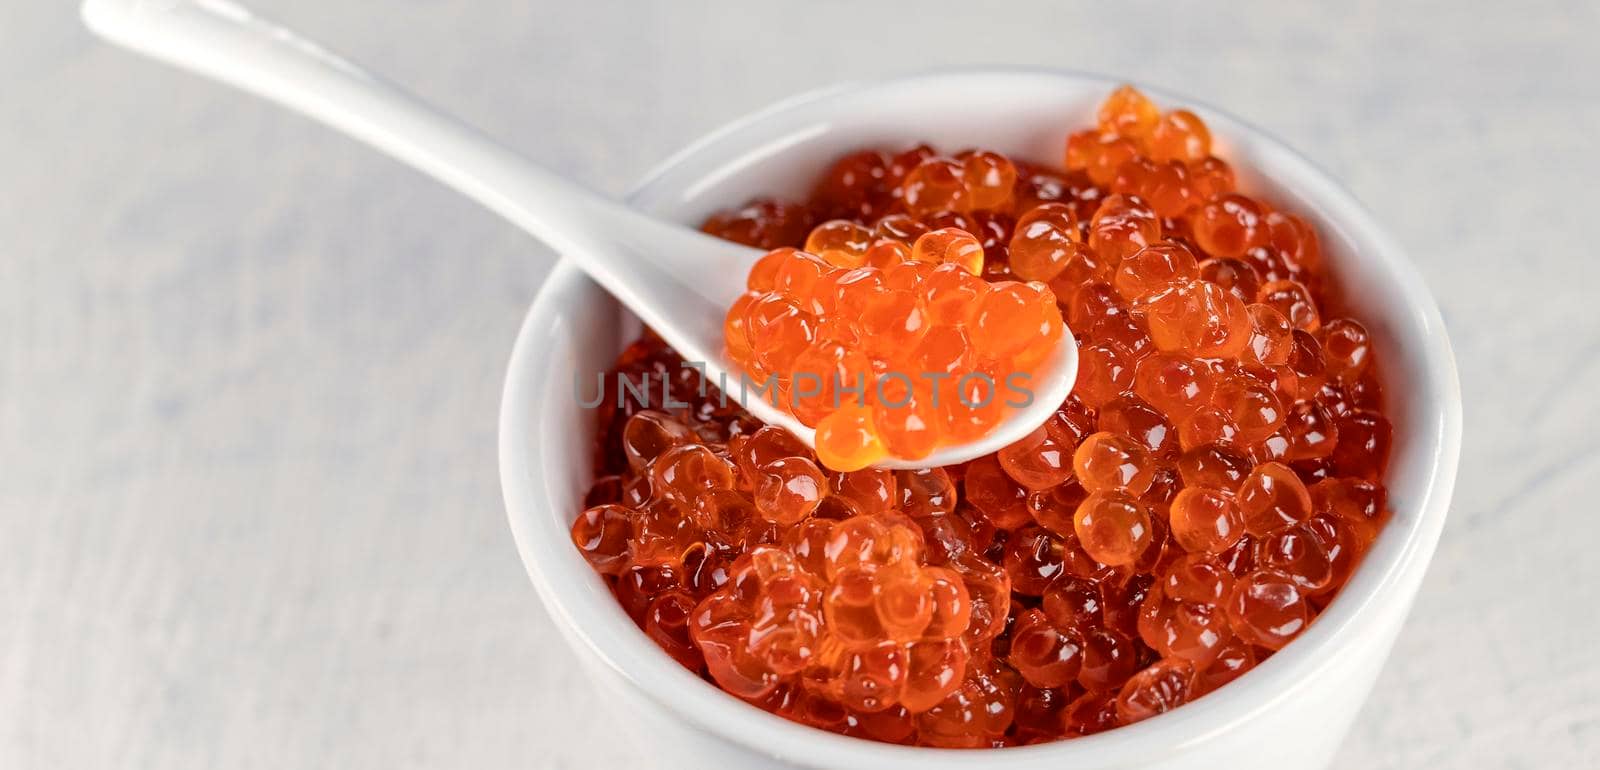 banner with close up delicious, crumbly, large red caviar in a white cup with a spoon on a white background. Soft focus